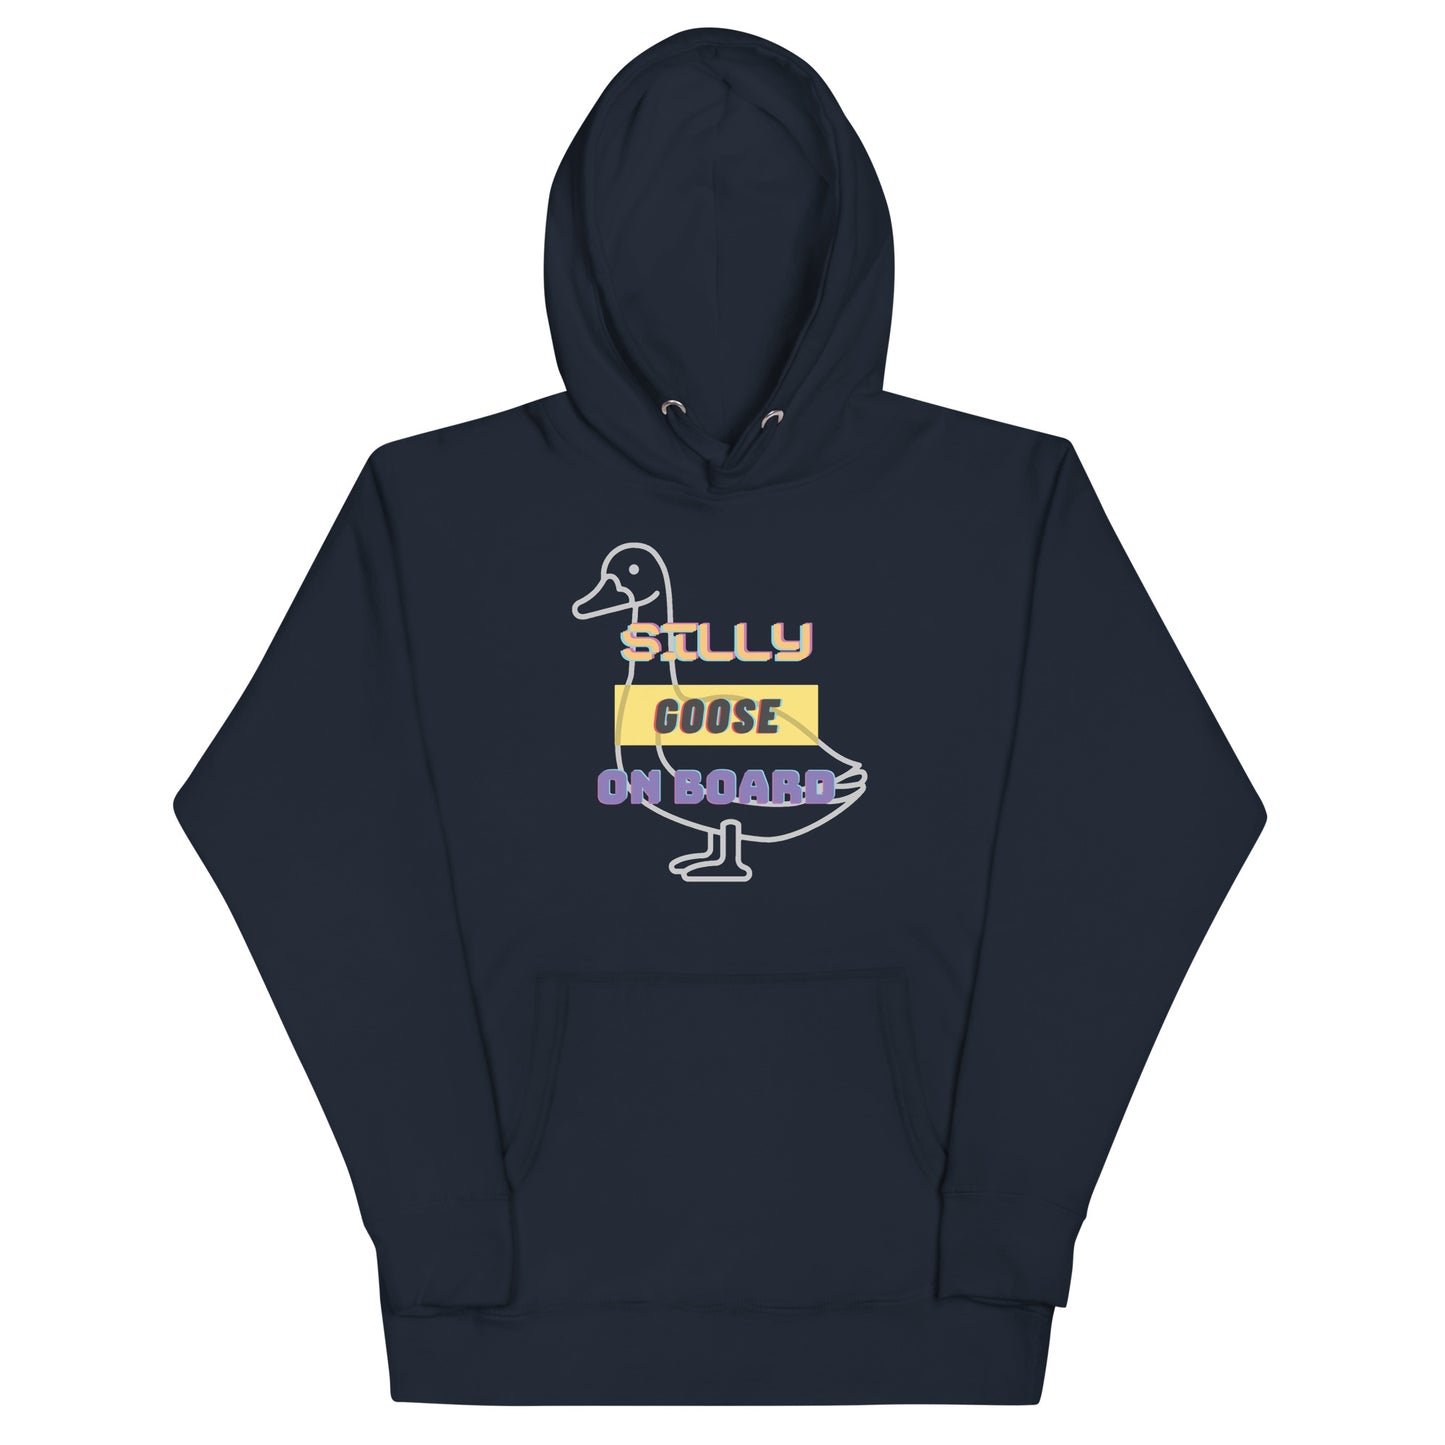 Silly Goose Onboard Unisex Hoodie